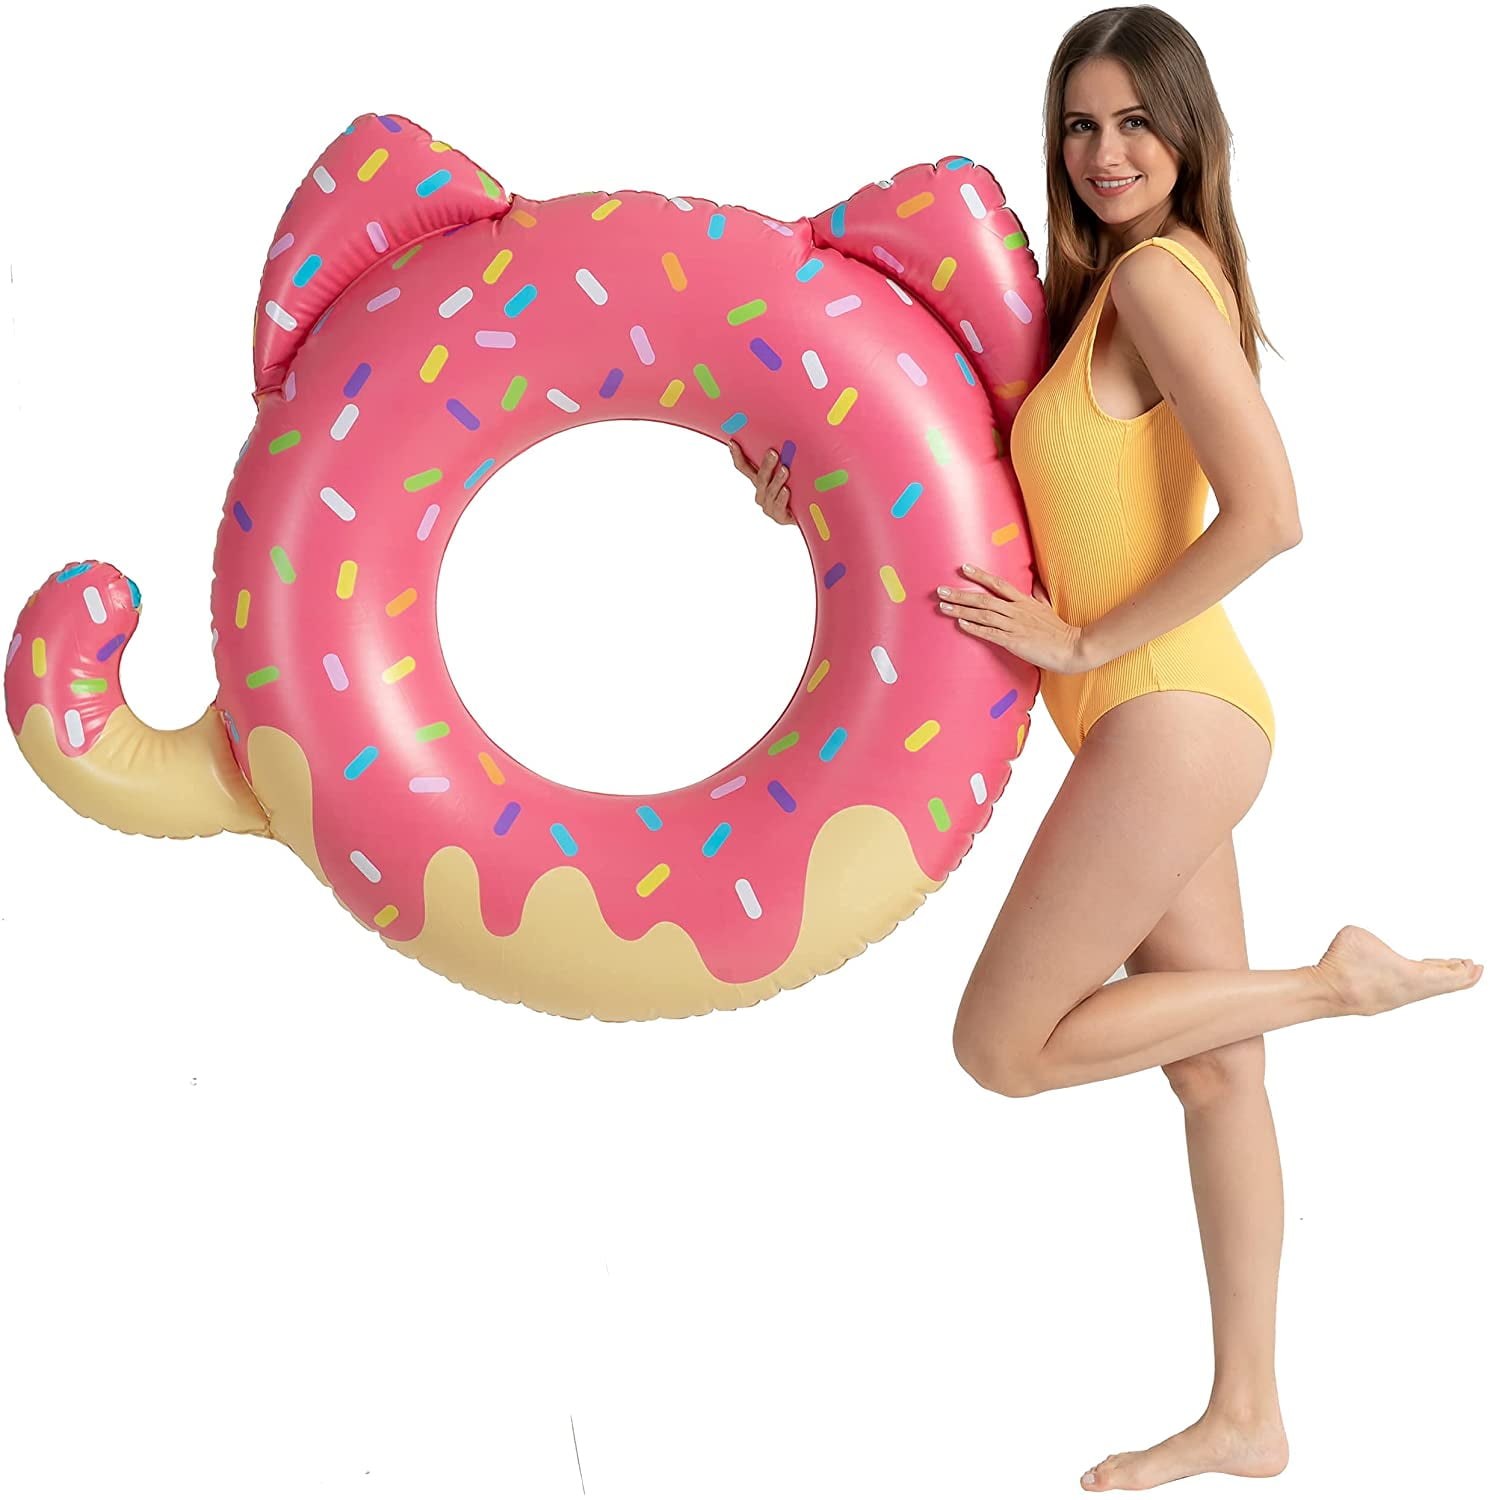 Adult/Kids Inflatable Donut Rubber Ring Pool Float Lilo Toys Doughnut Dohnuts 